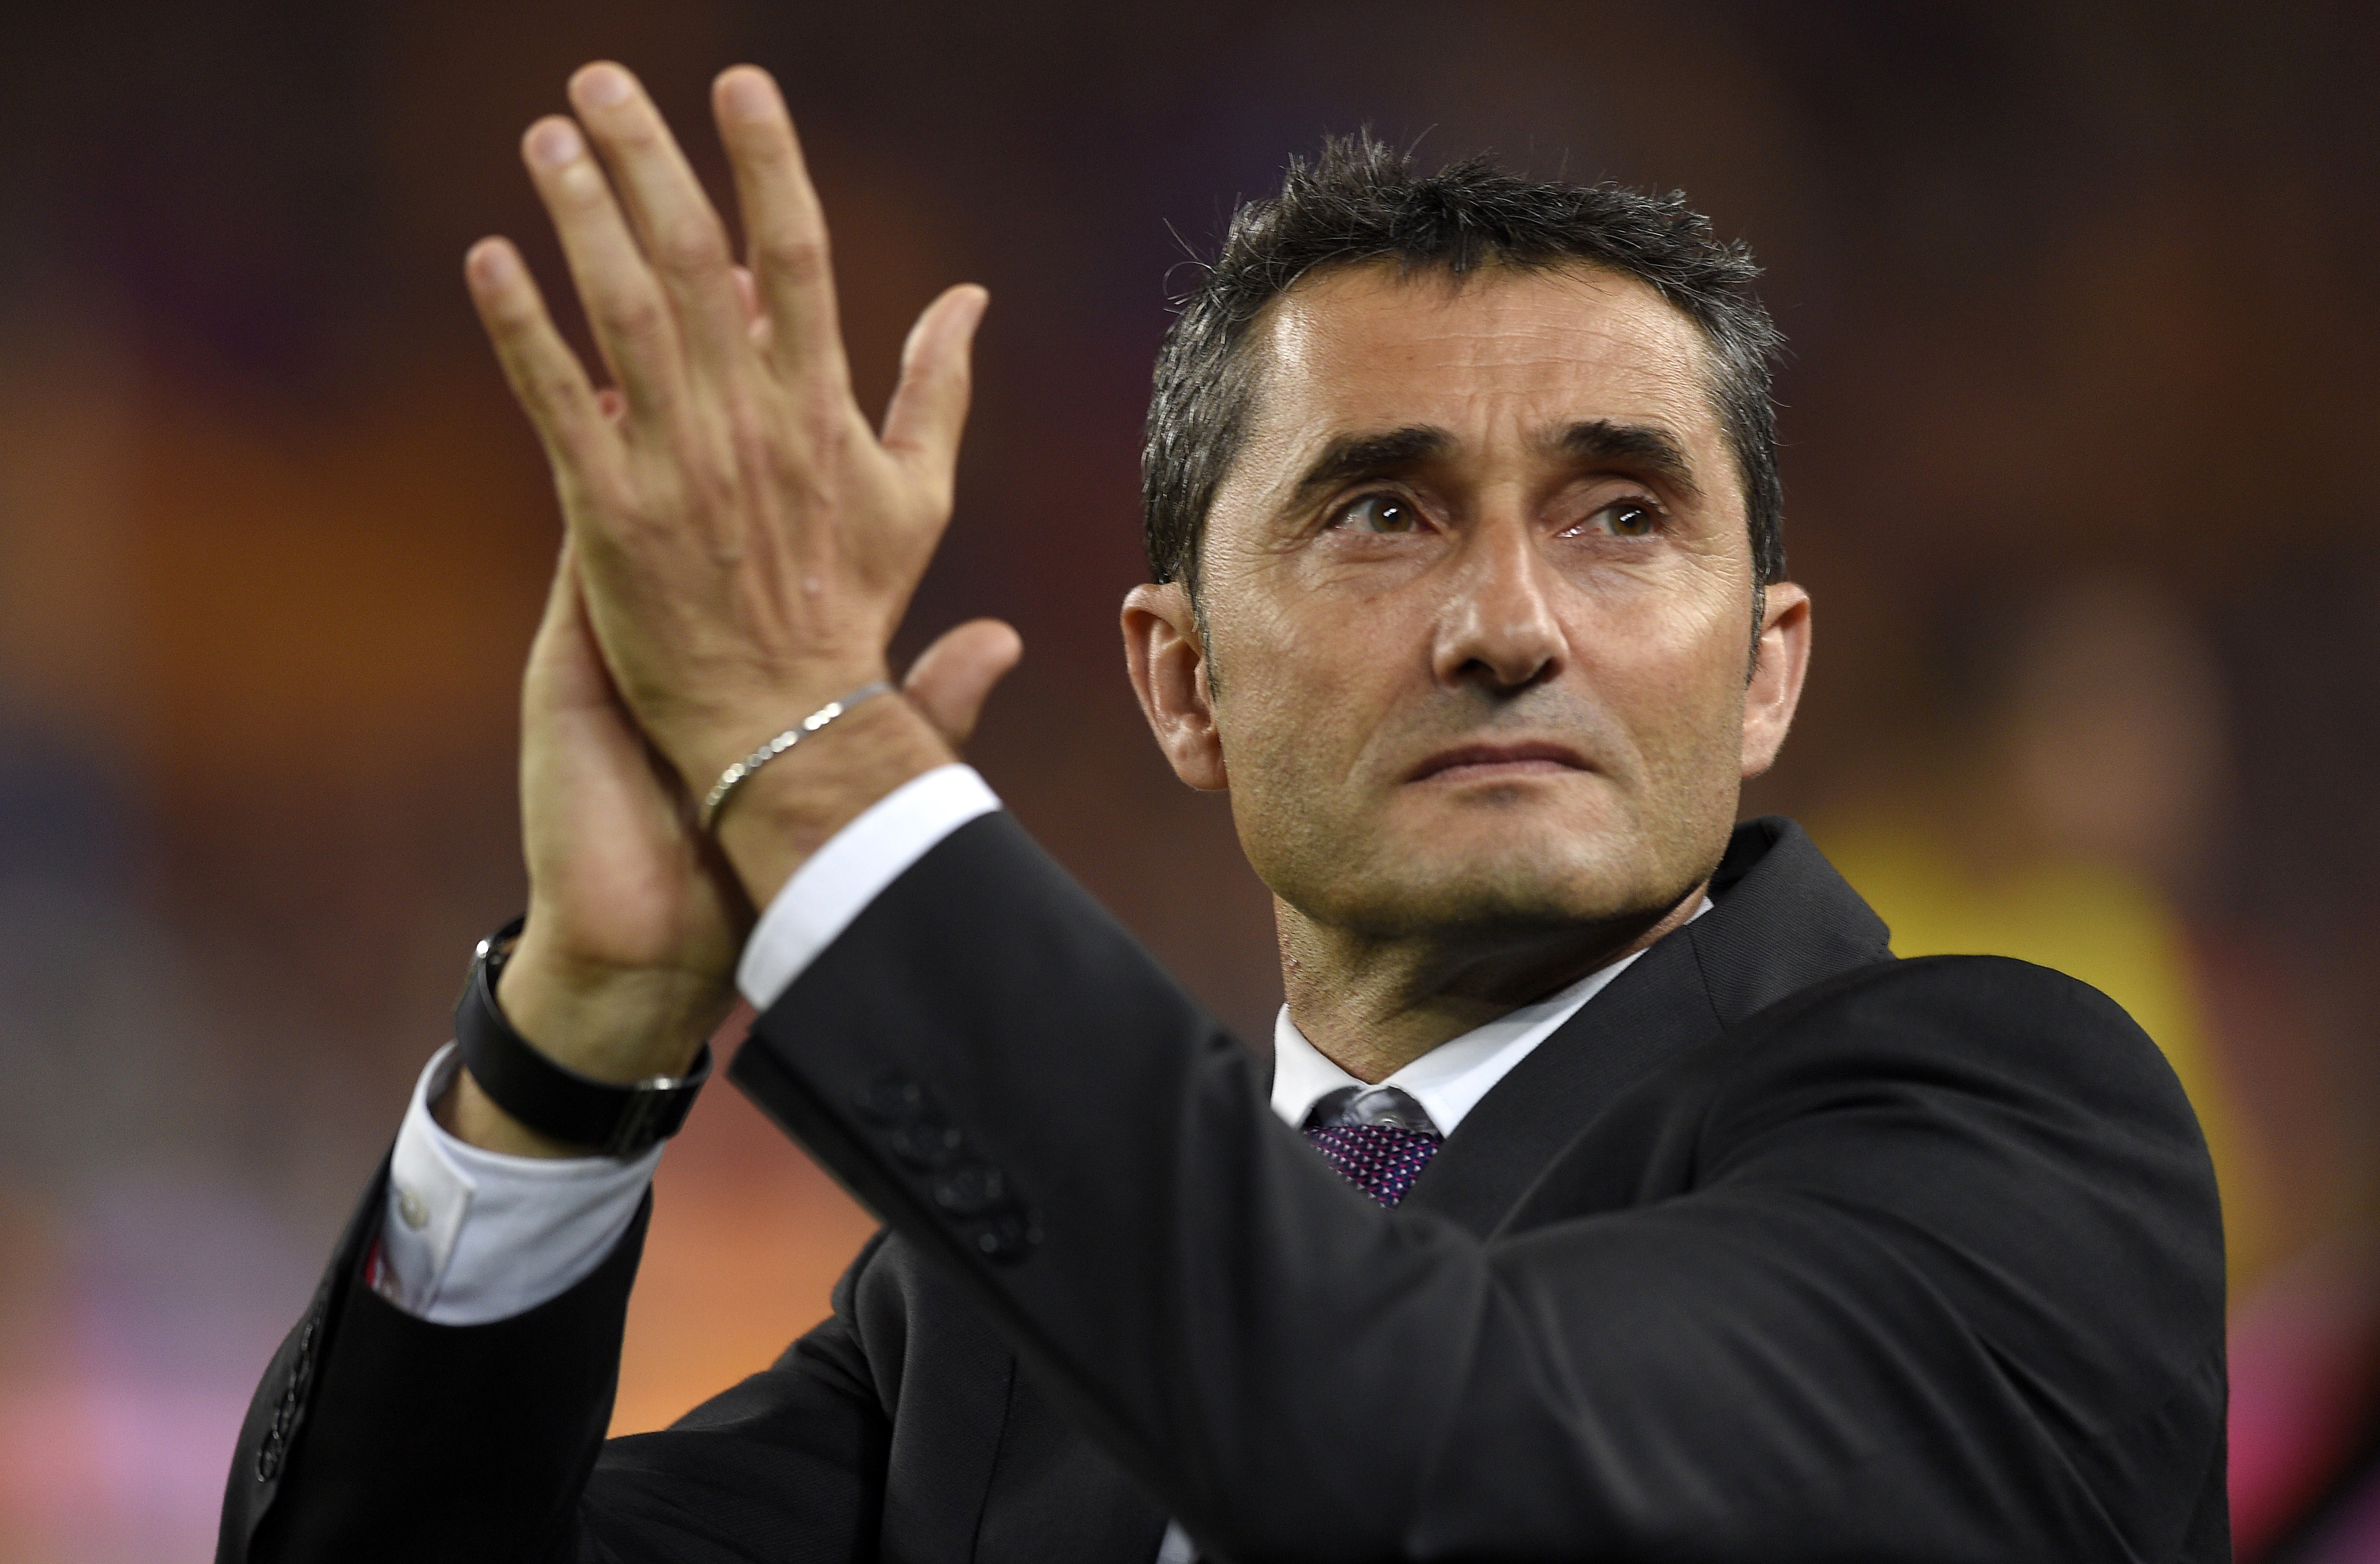 Athletic Bilbao's coach Ernesto Valverde applauds at the end of the Spanish Copa del Rey (King's Cup) final football match Athletic Club Bilbao vs FC Barcelona at the Camp Nou stadium in Barcelona on May 30, 2015. Barcelona won 3-1.  AFP PHOTO/ LLUIS GENE        (Photo credit should read LLUIS GENE/AFP/Getty Images)